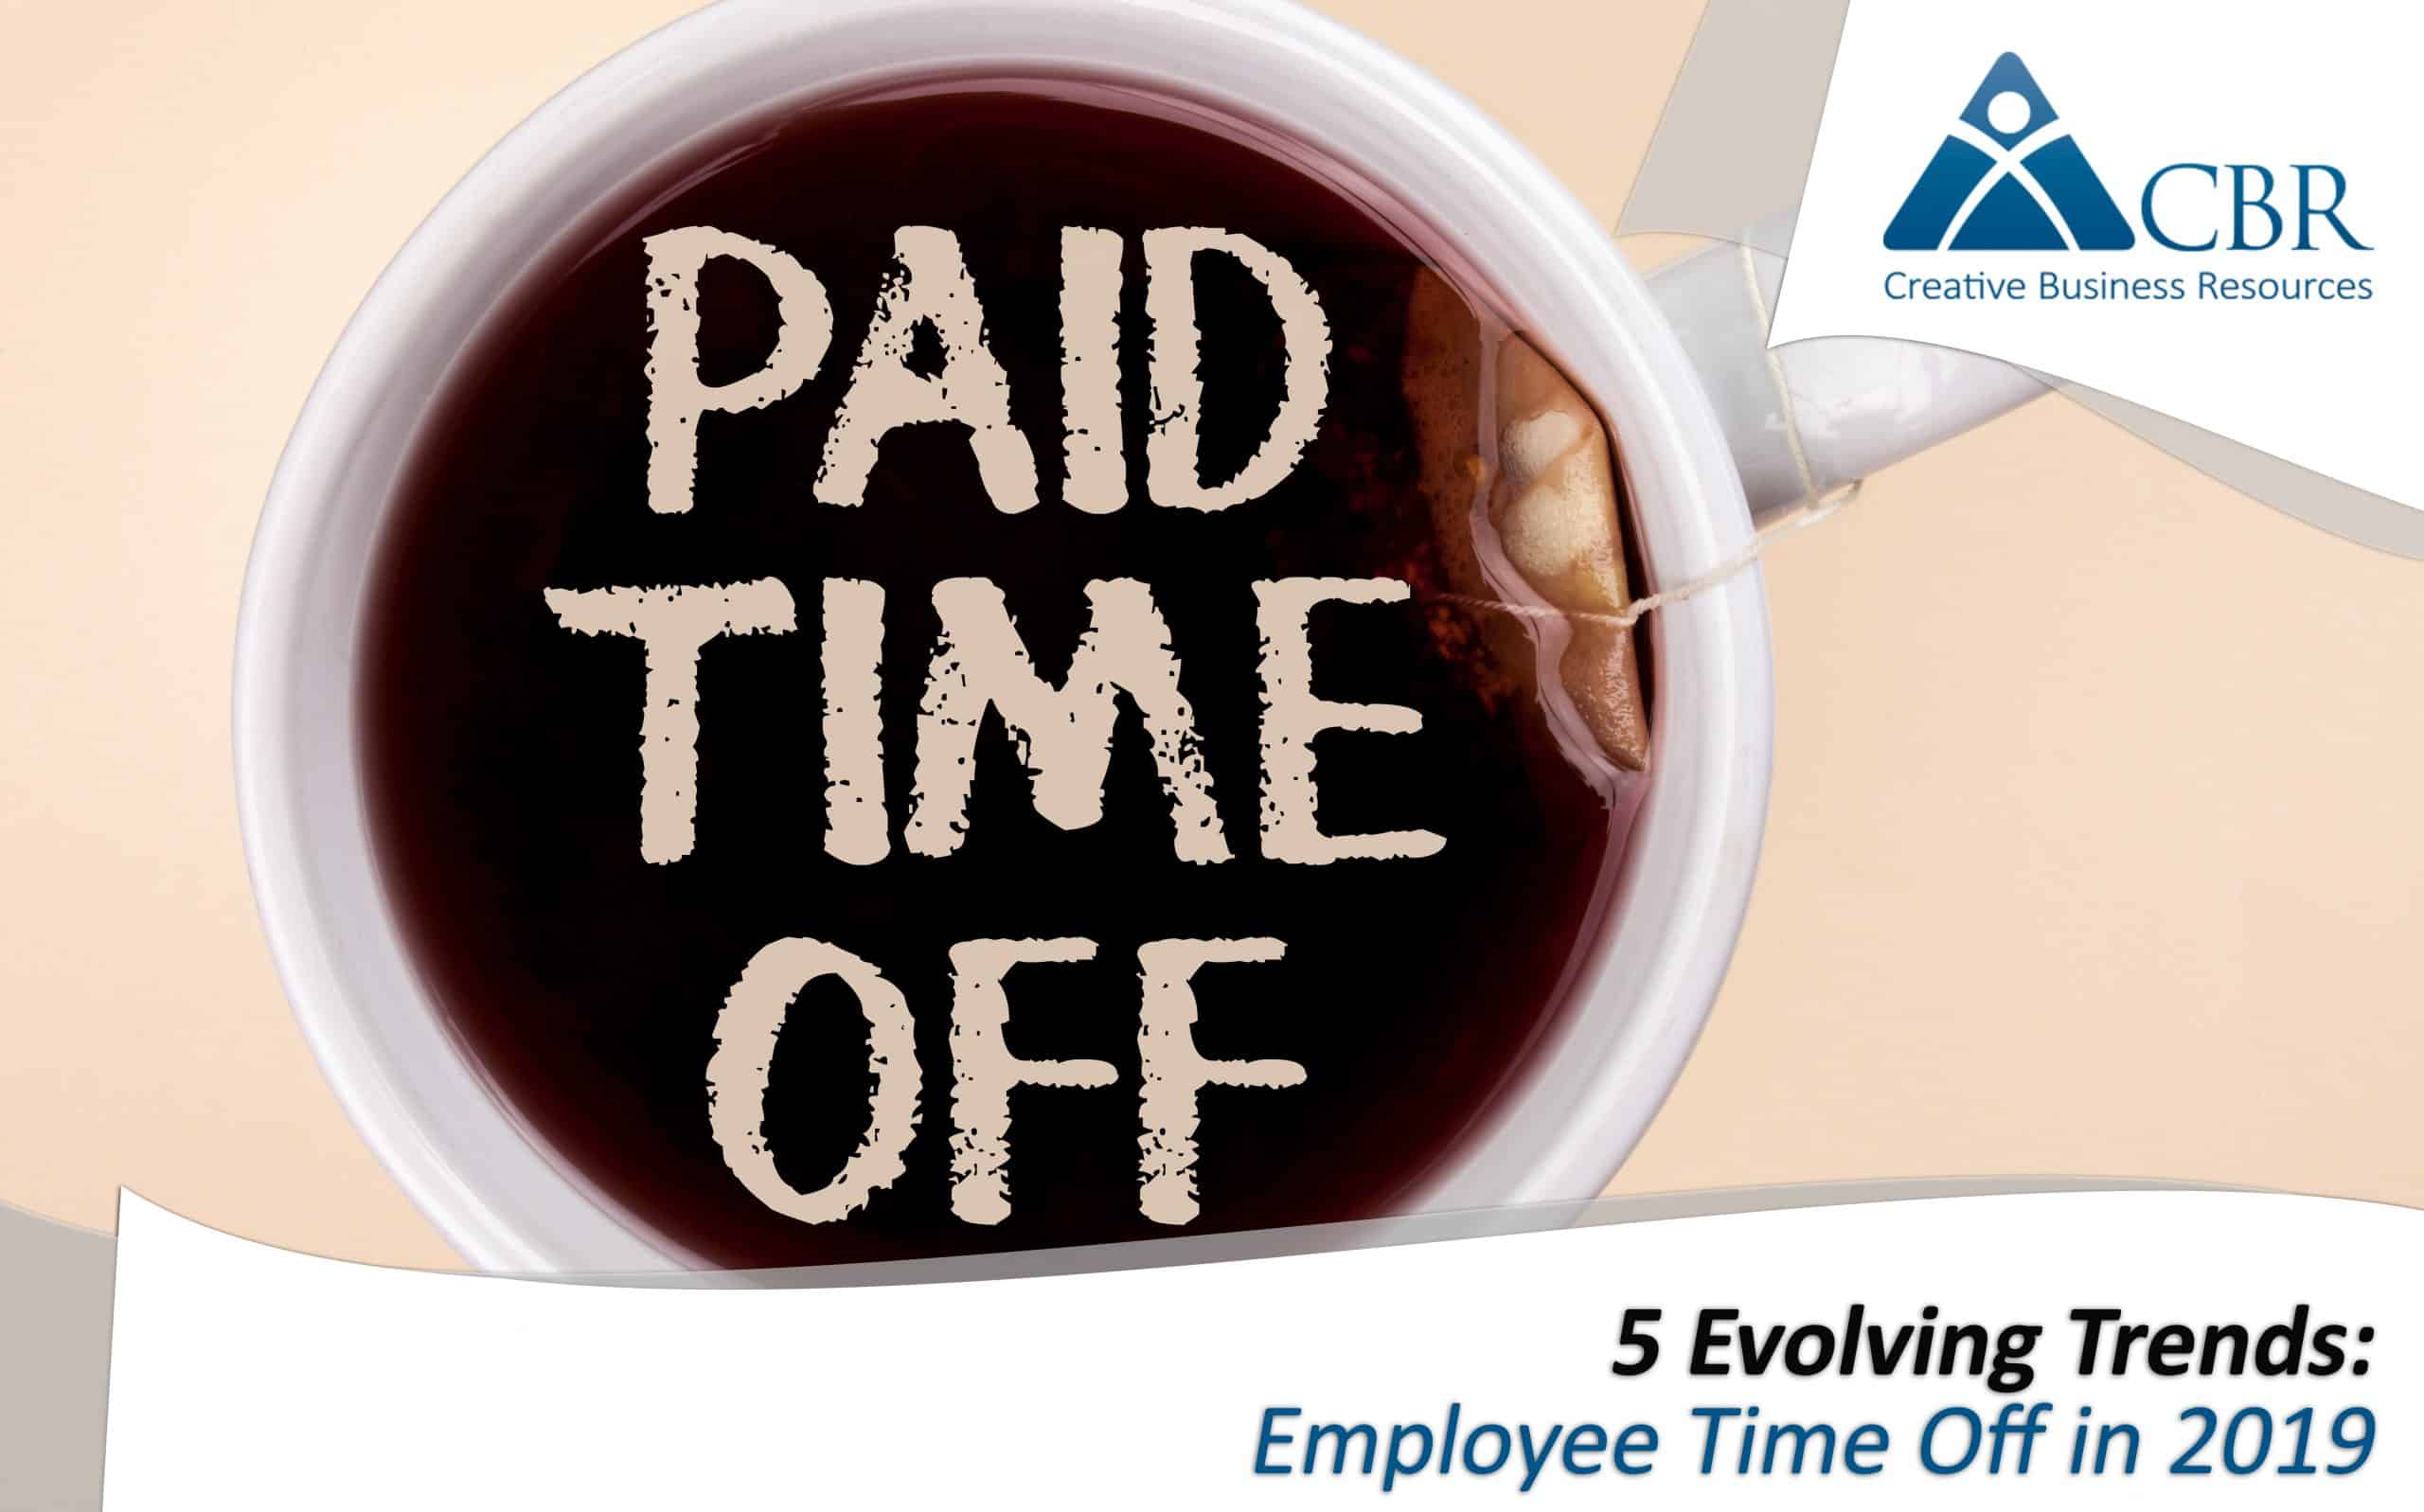 5 Evolving Trends: Employee Time Off in 2019